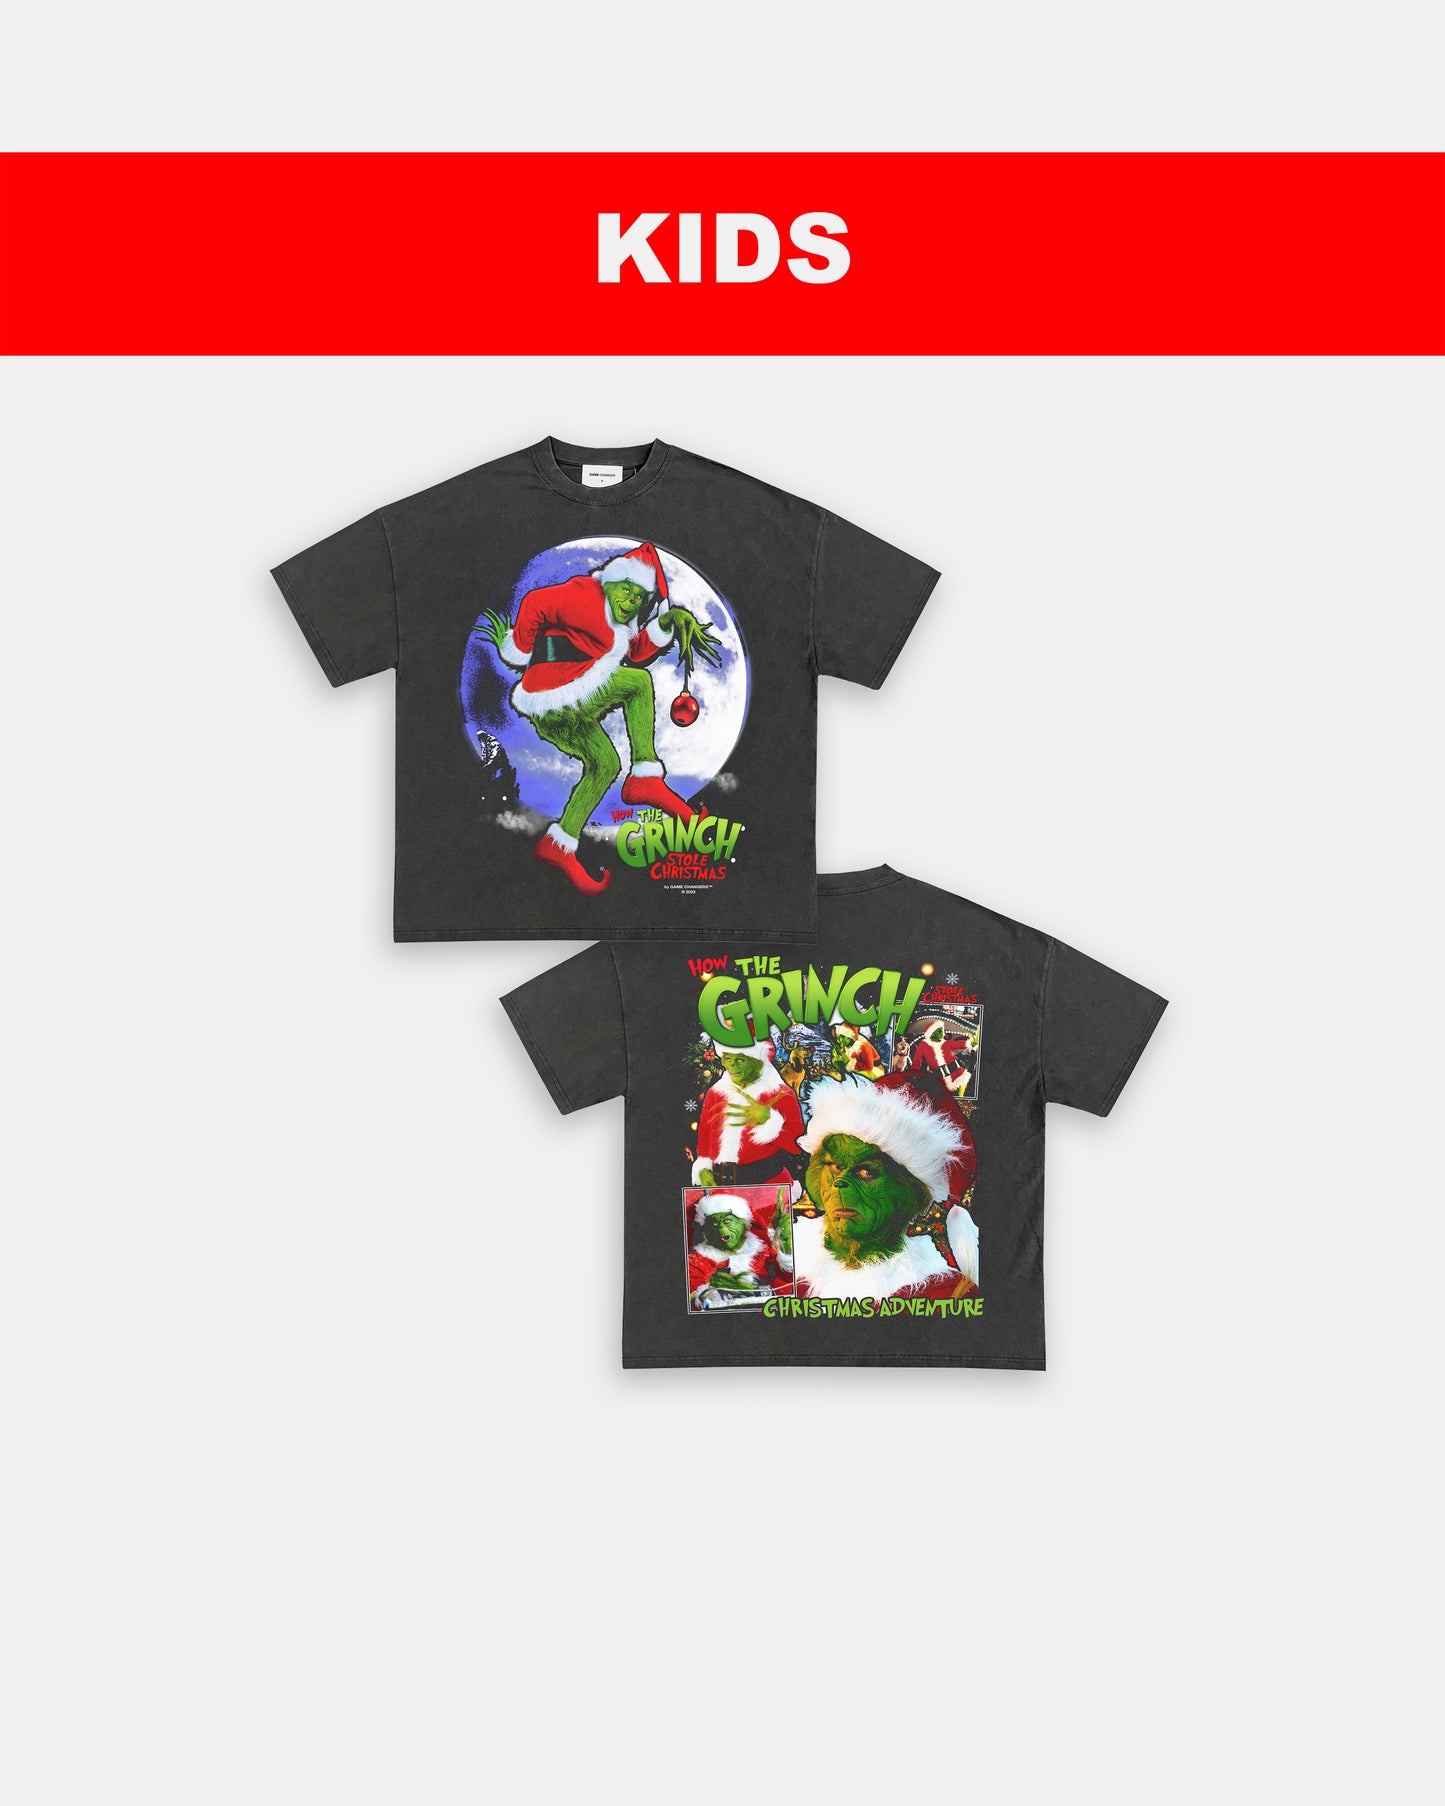 THE GRINCH - JIM CARREY - KIDS TEE - [DS]